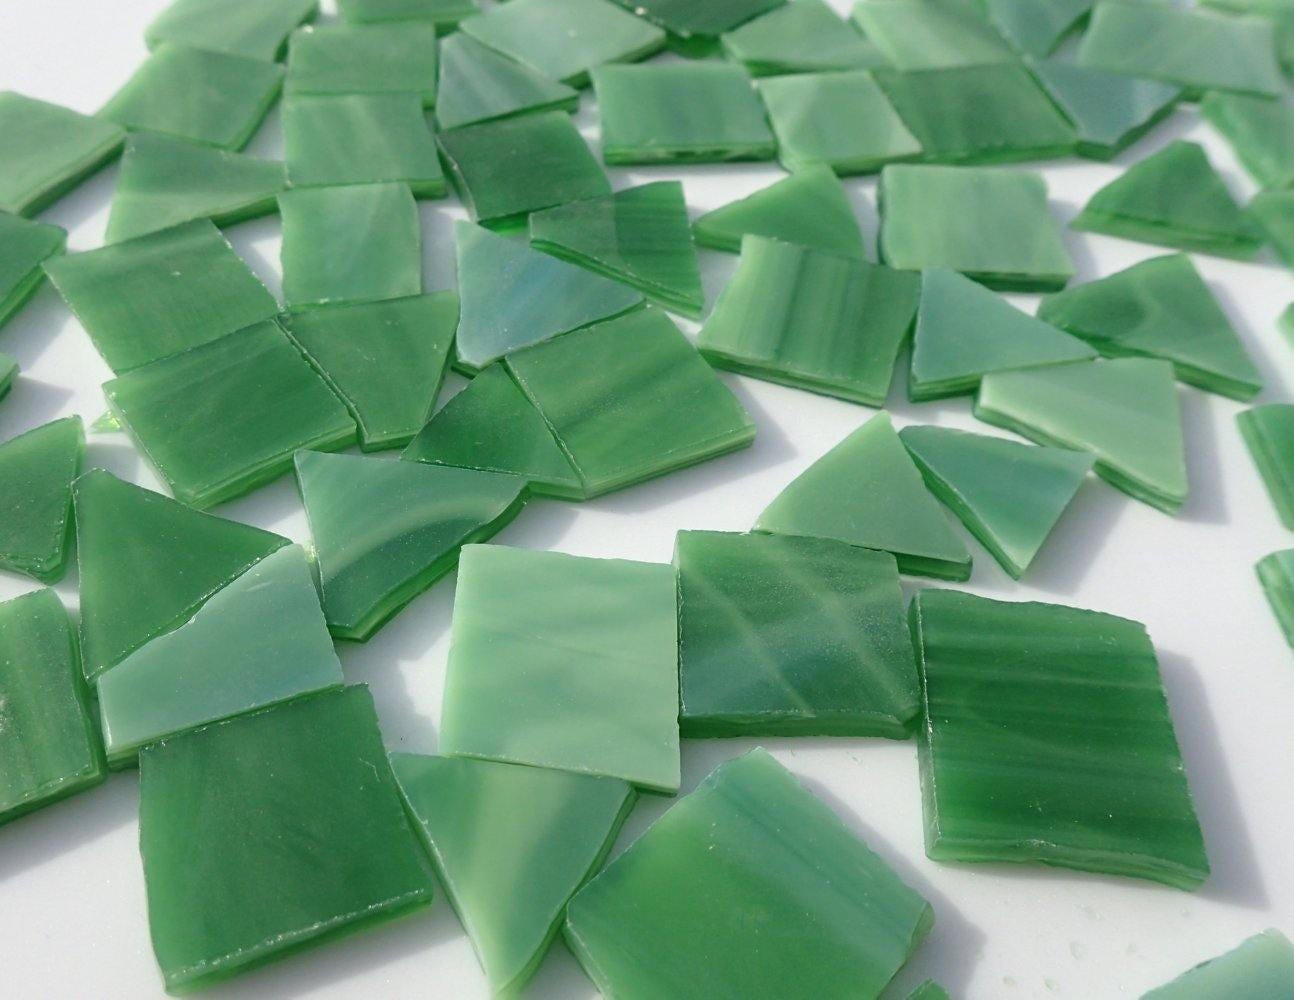 Stained Glass Mosaic Tiles in Fern Green - 1/2 Pound - Tumbled Glass in Shades of Pickle Green